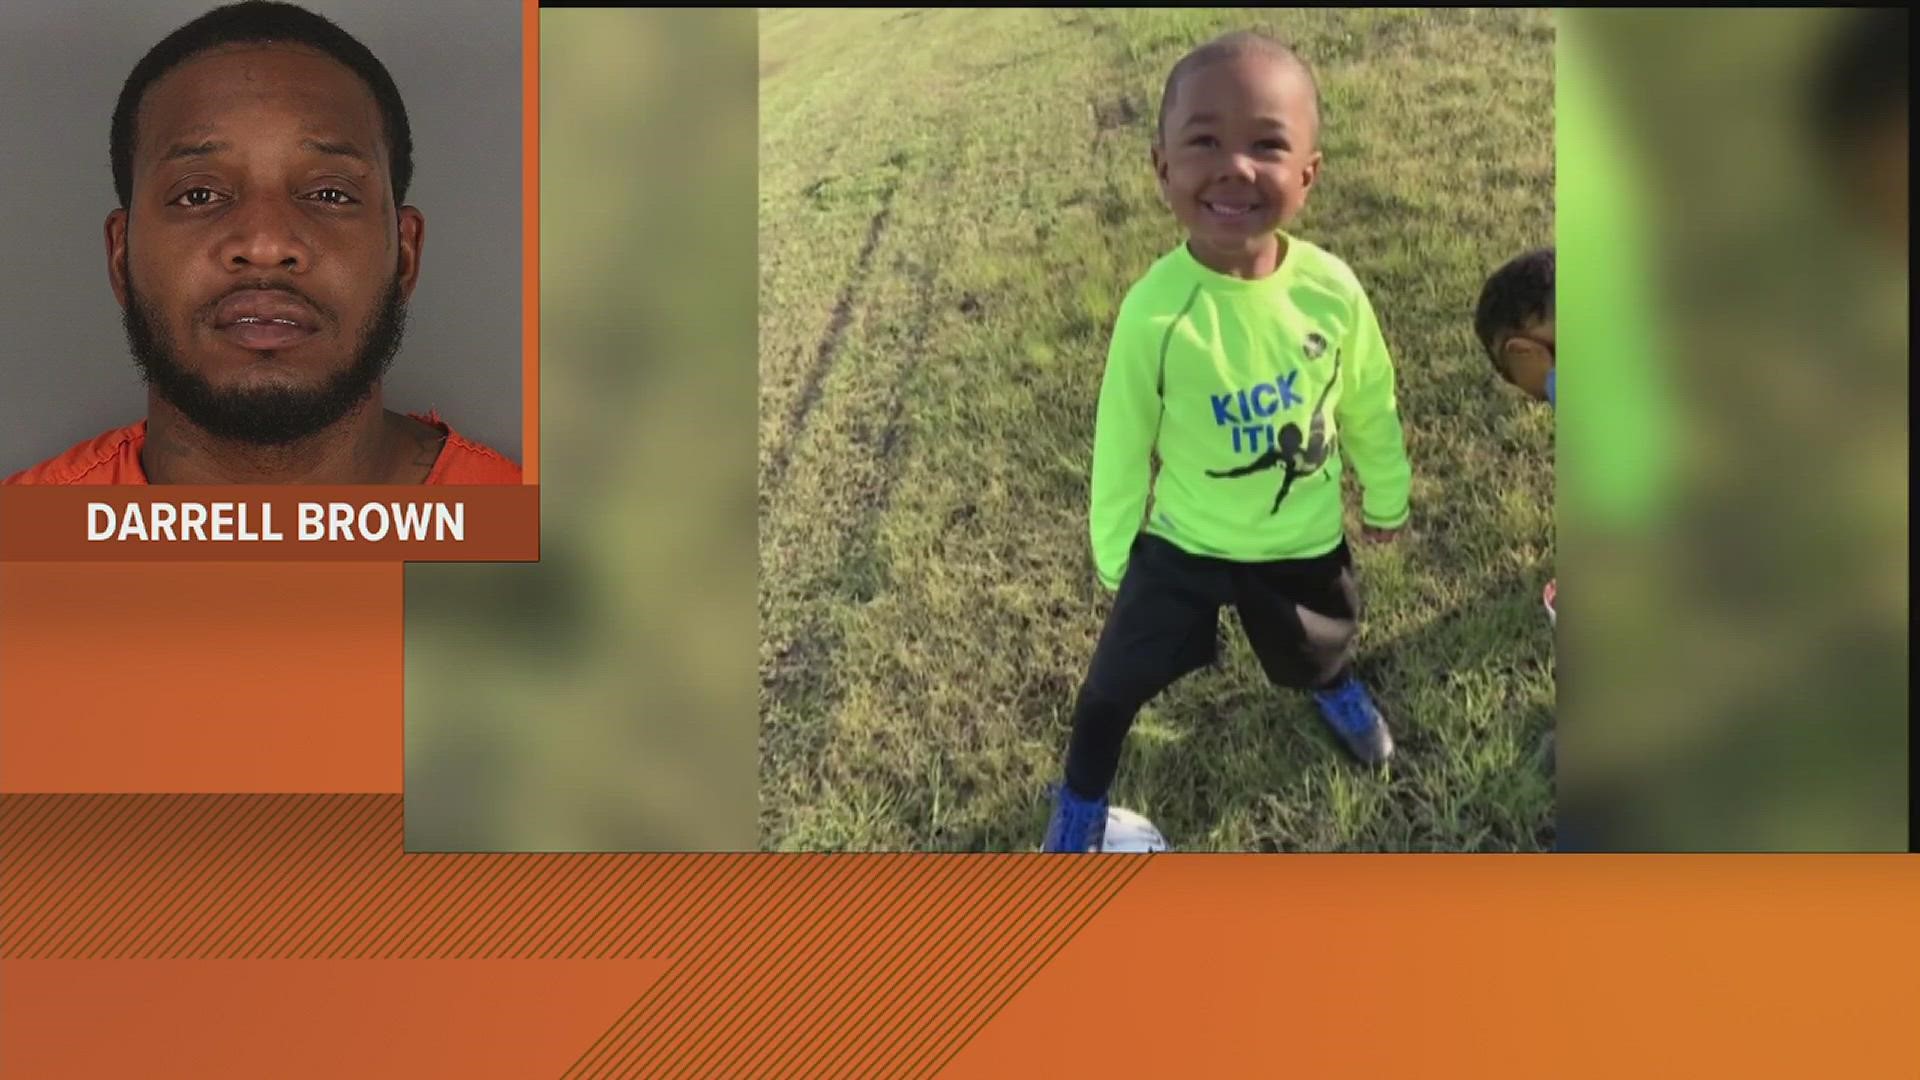 Testimony began Tuesday morning in the trial of a man charged with manslaughter in connection with the 2021 death of a 6-year-old boy who was struck by an ATV.